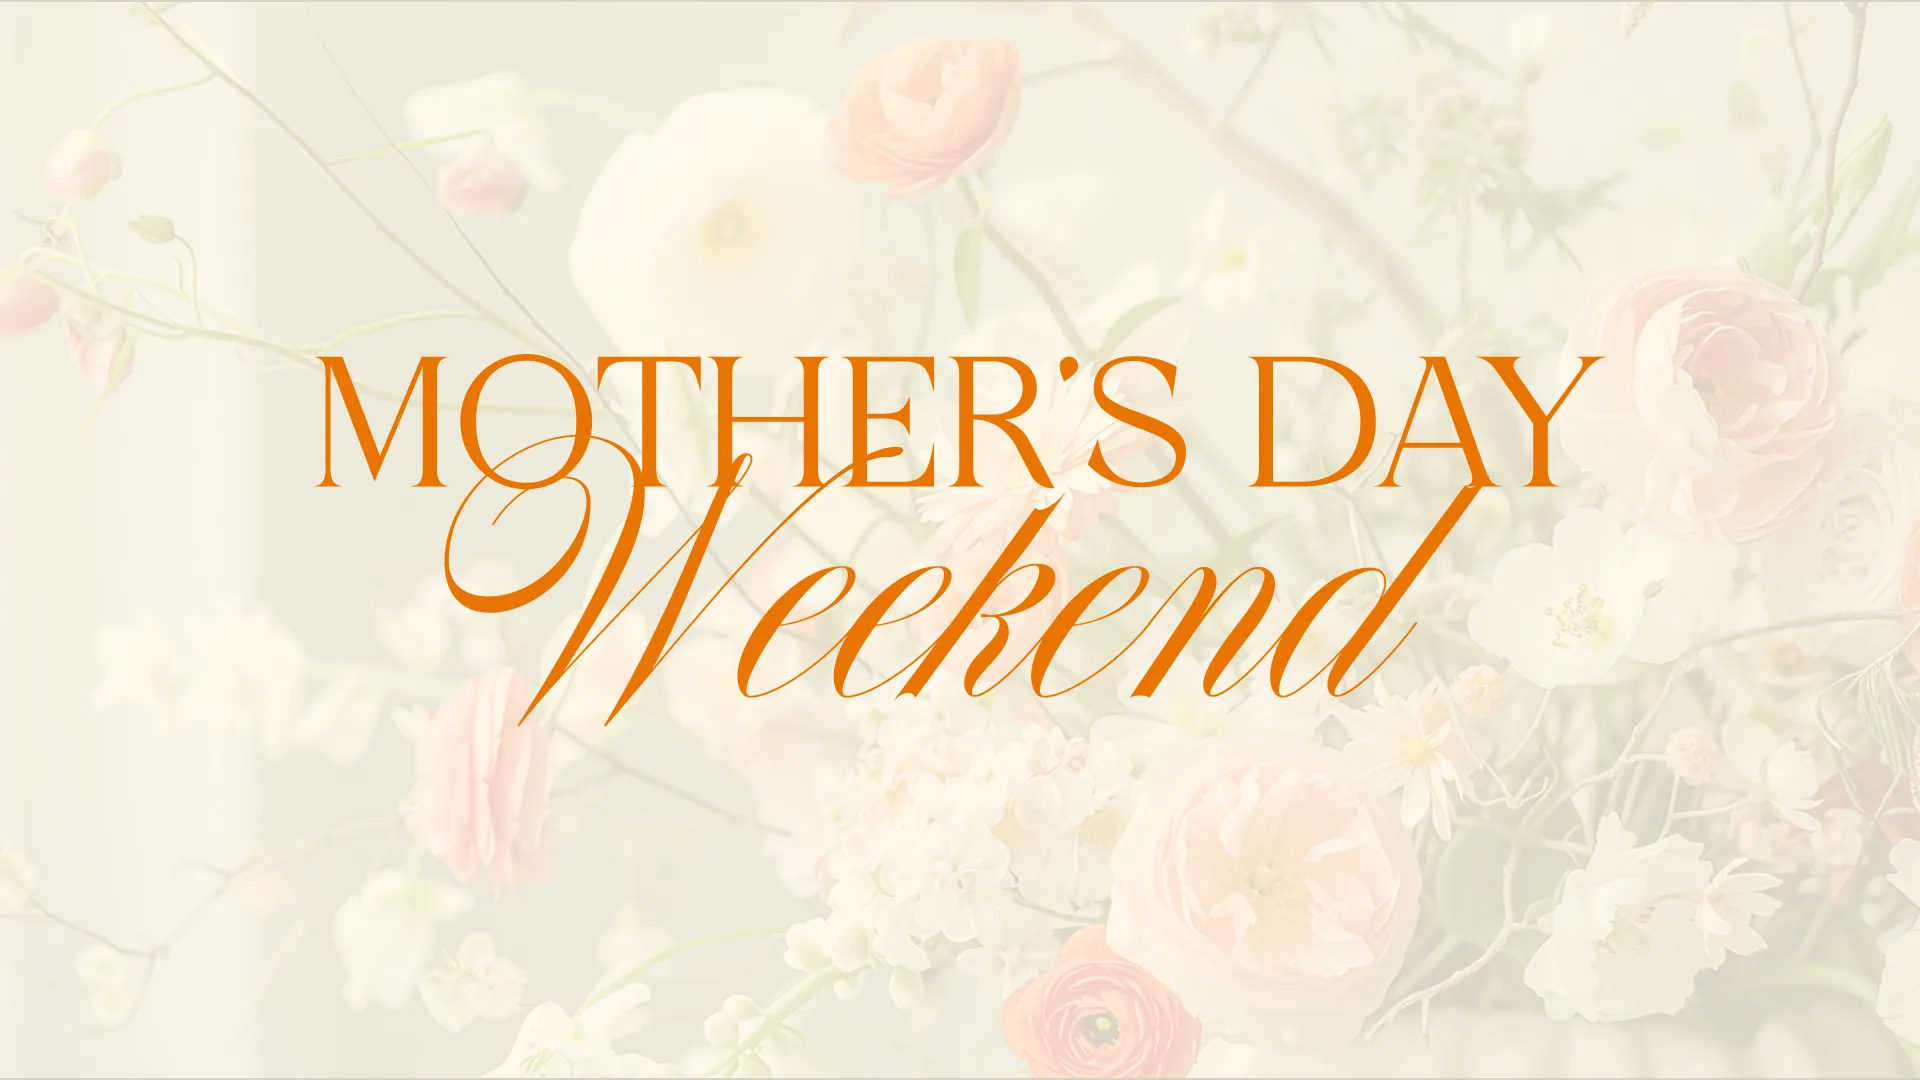 This 'Mother'S Day Weekend' Graphic Is Delicately Designed With Soft Floral Elements, Making It A Perfect Choice For Church Media During This Special Celebration. It Warmly Invites The Congregation To Honor And Appreciate The Invaluable Role Of Mothers.